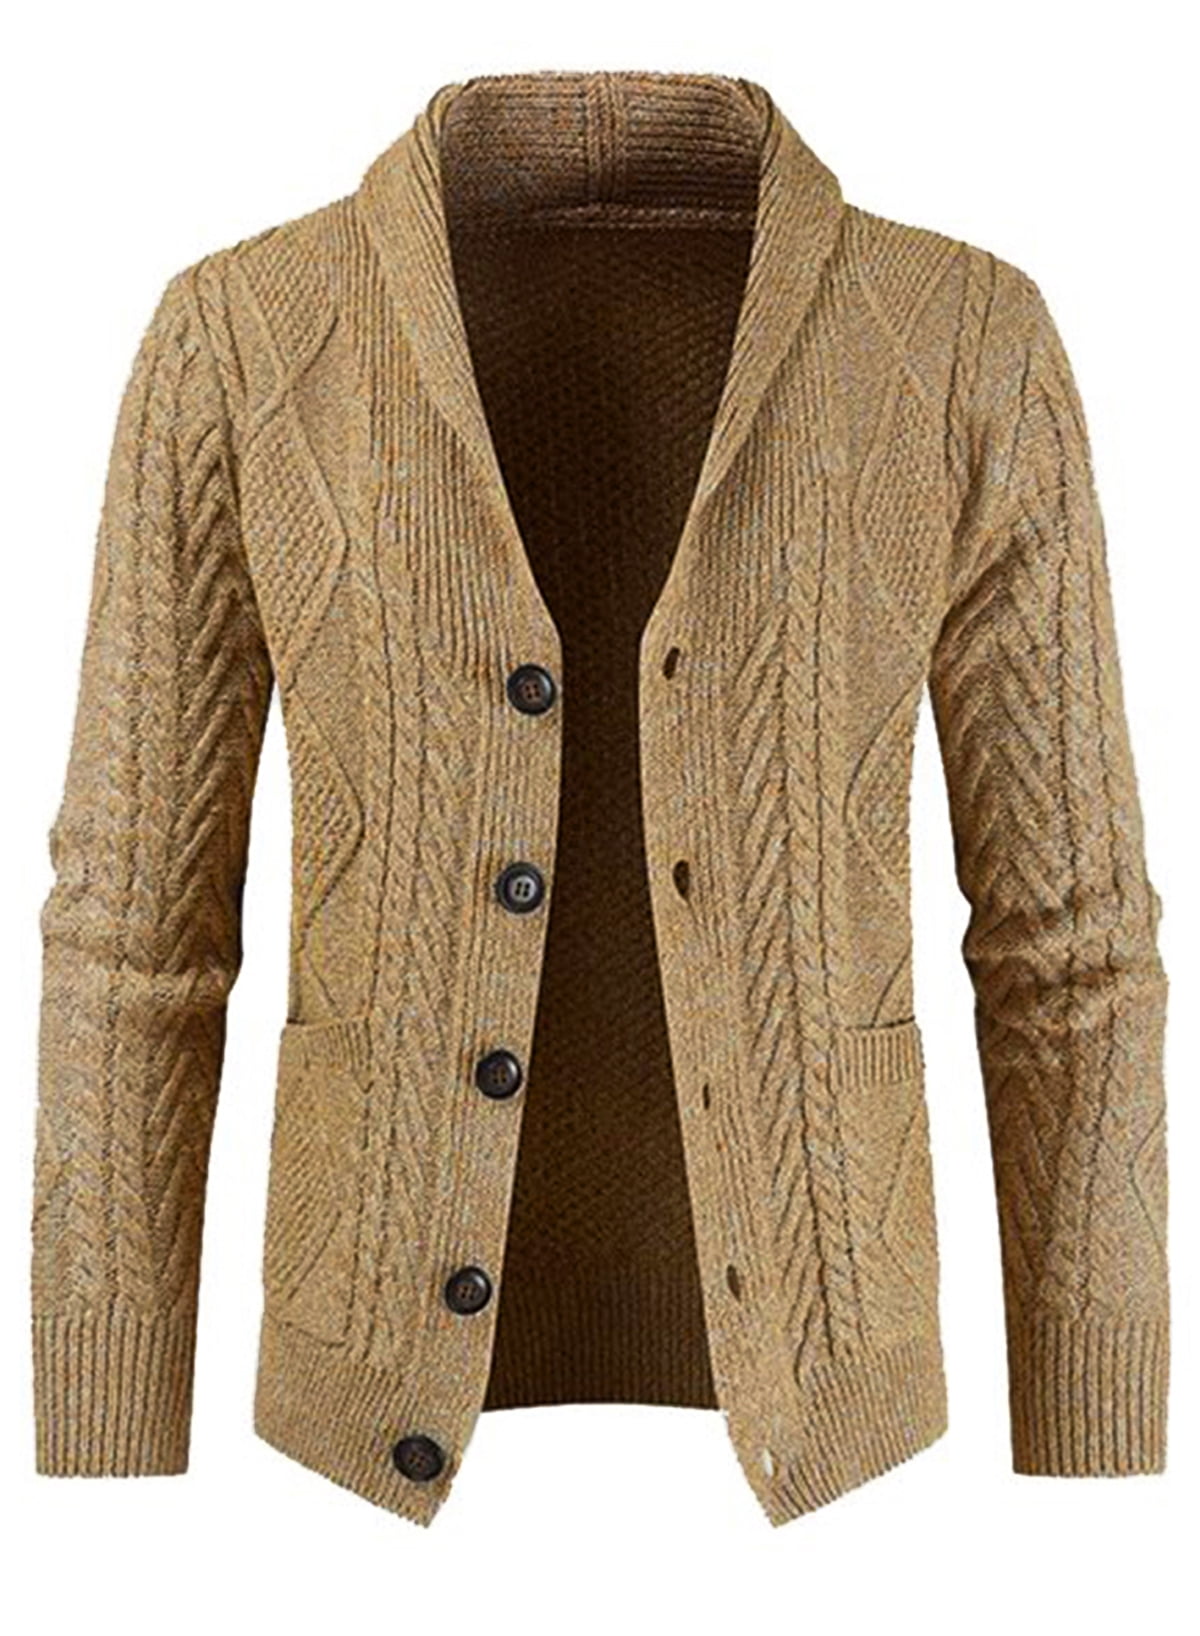 JMIERR Men's Casual Long Sleeve Cardigan Sweater Cable Knit Buttons ...